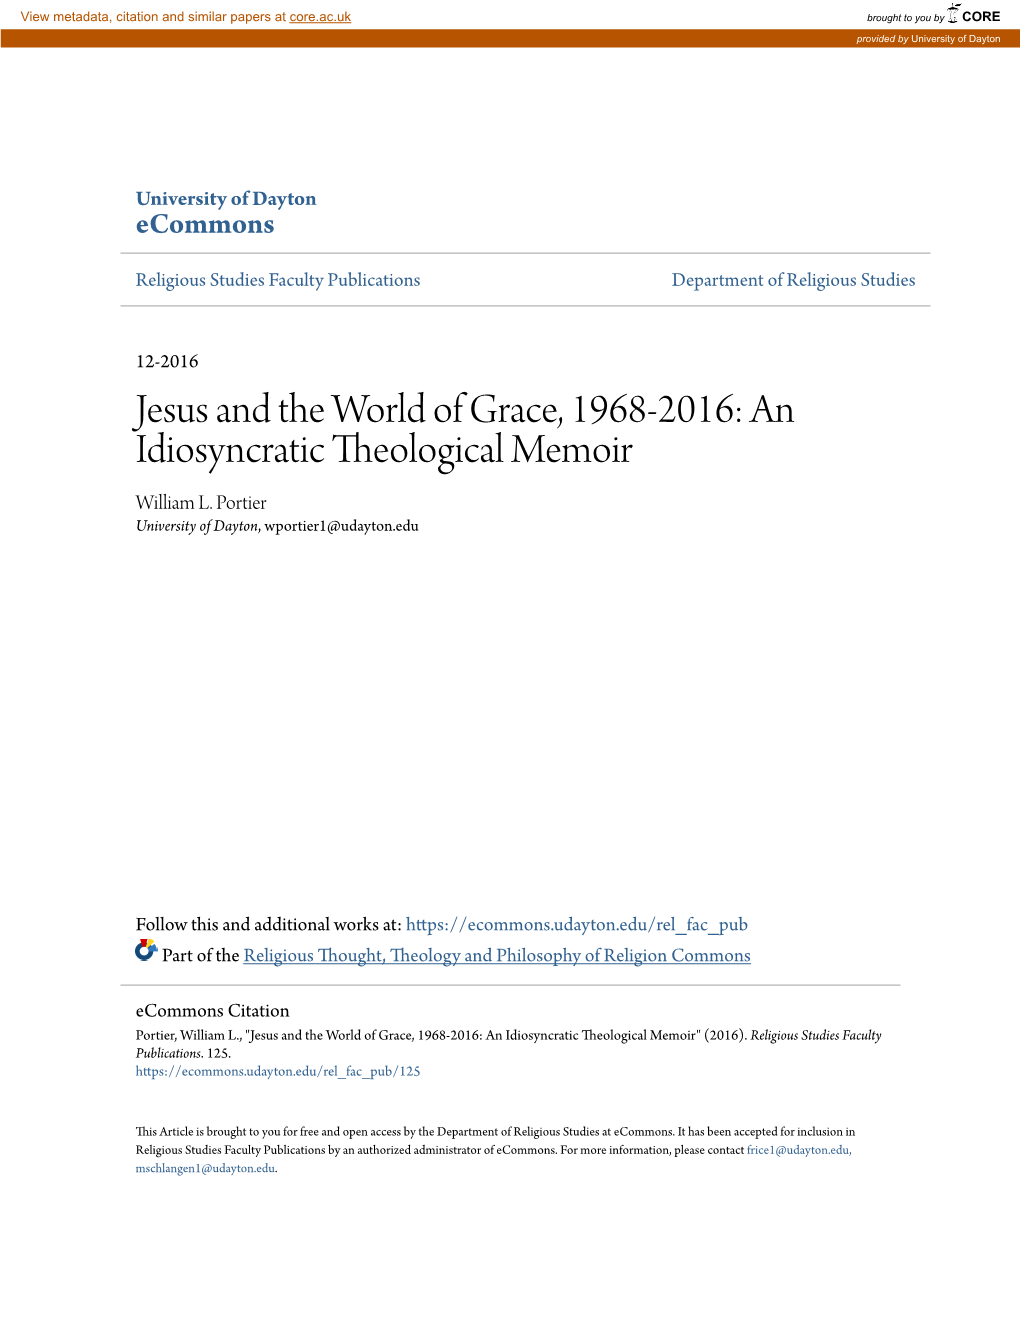 Jesus and the World of Grace, 1968-2016: an Idiosyncratic Theological Memoir William L